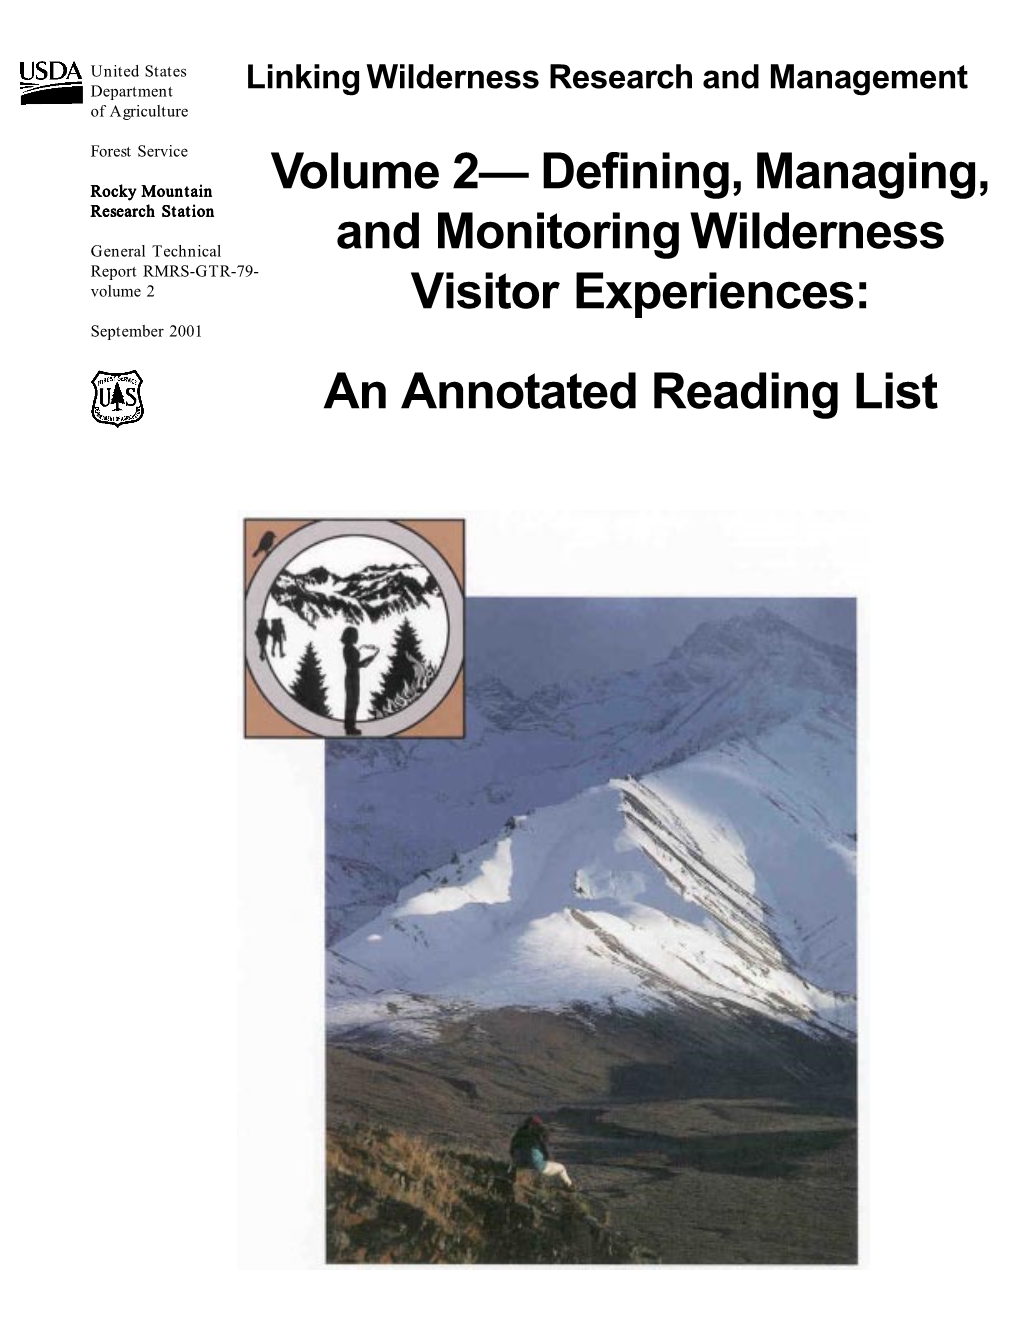 Defining, Managing, and Monitoring Wilderness Visitor Experiences: an Annotated Reading List